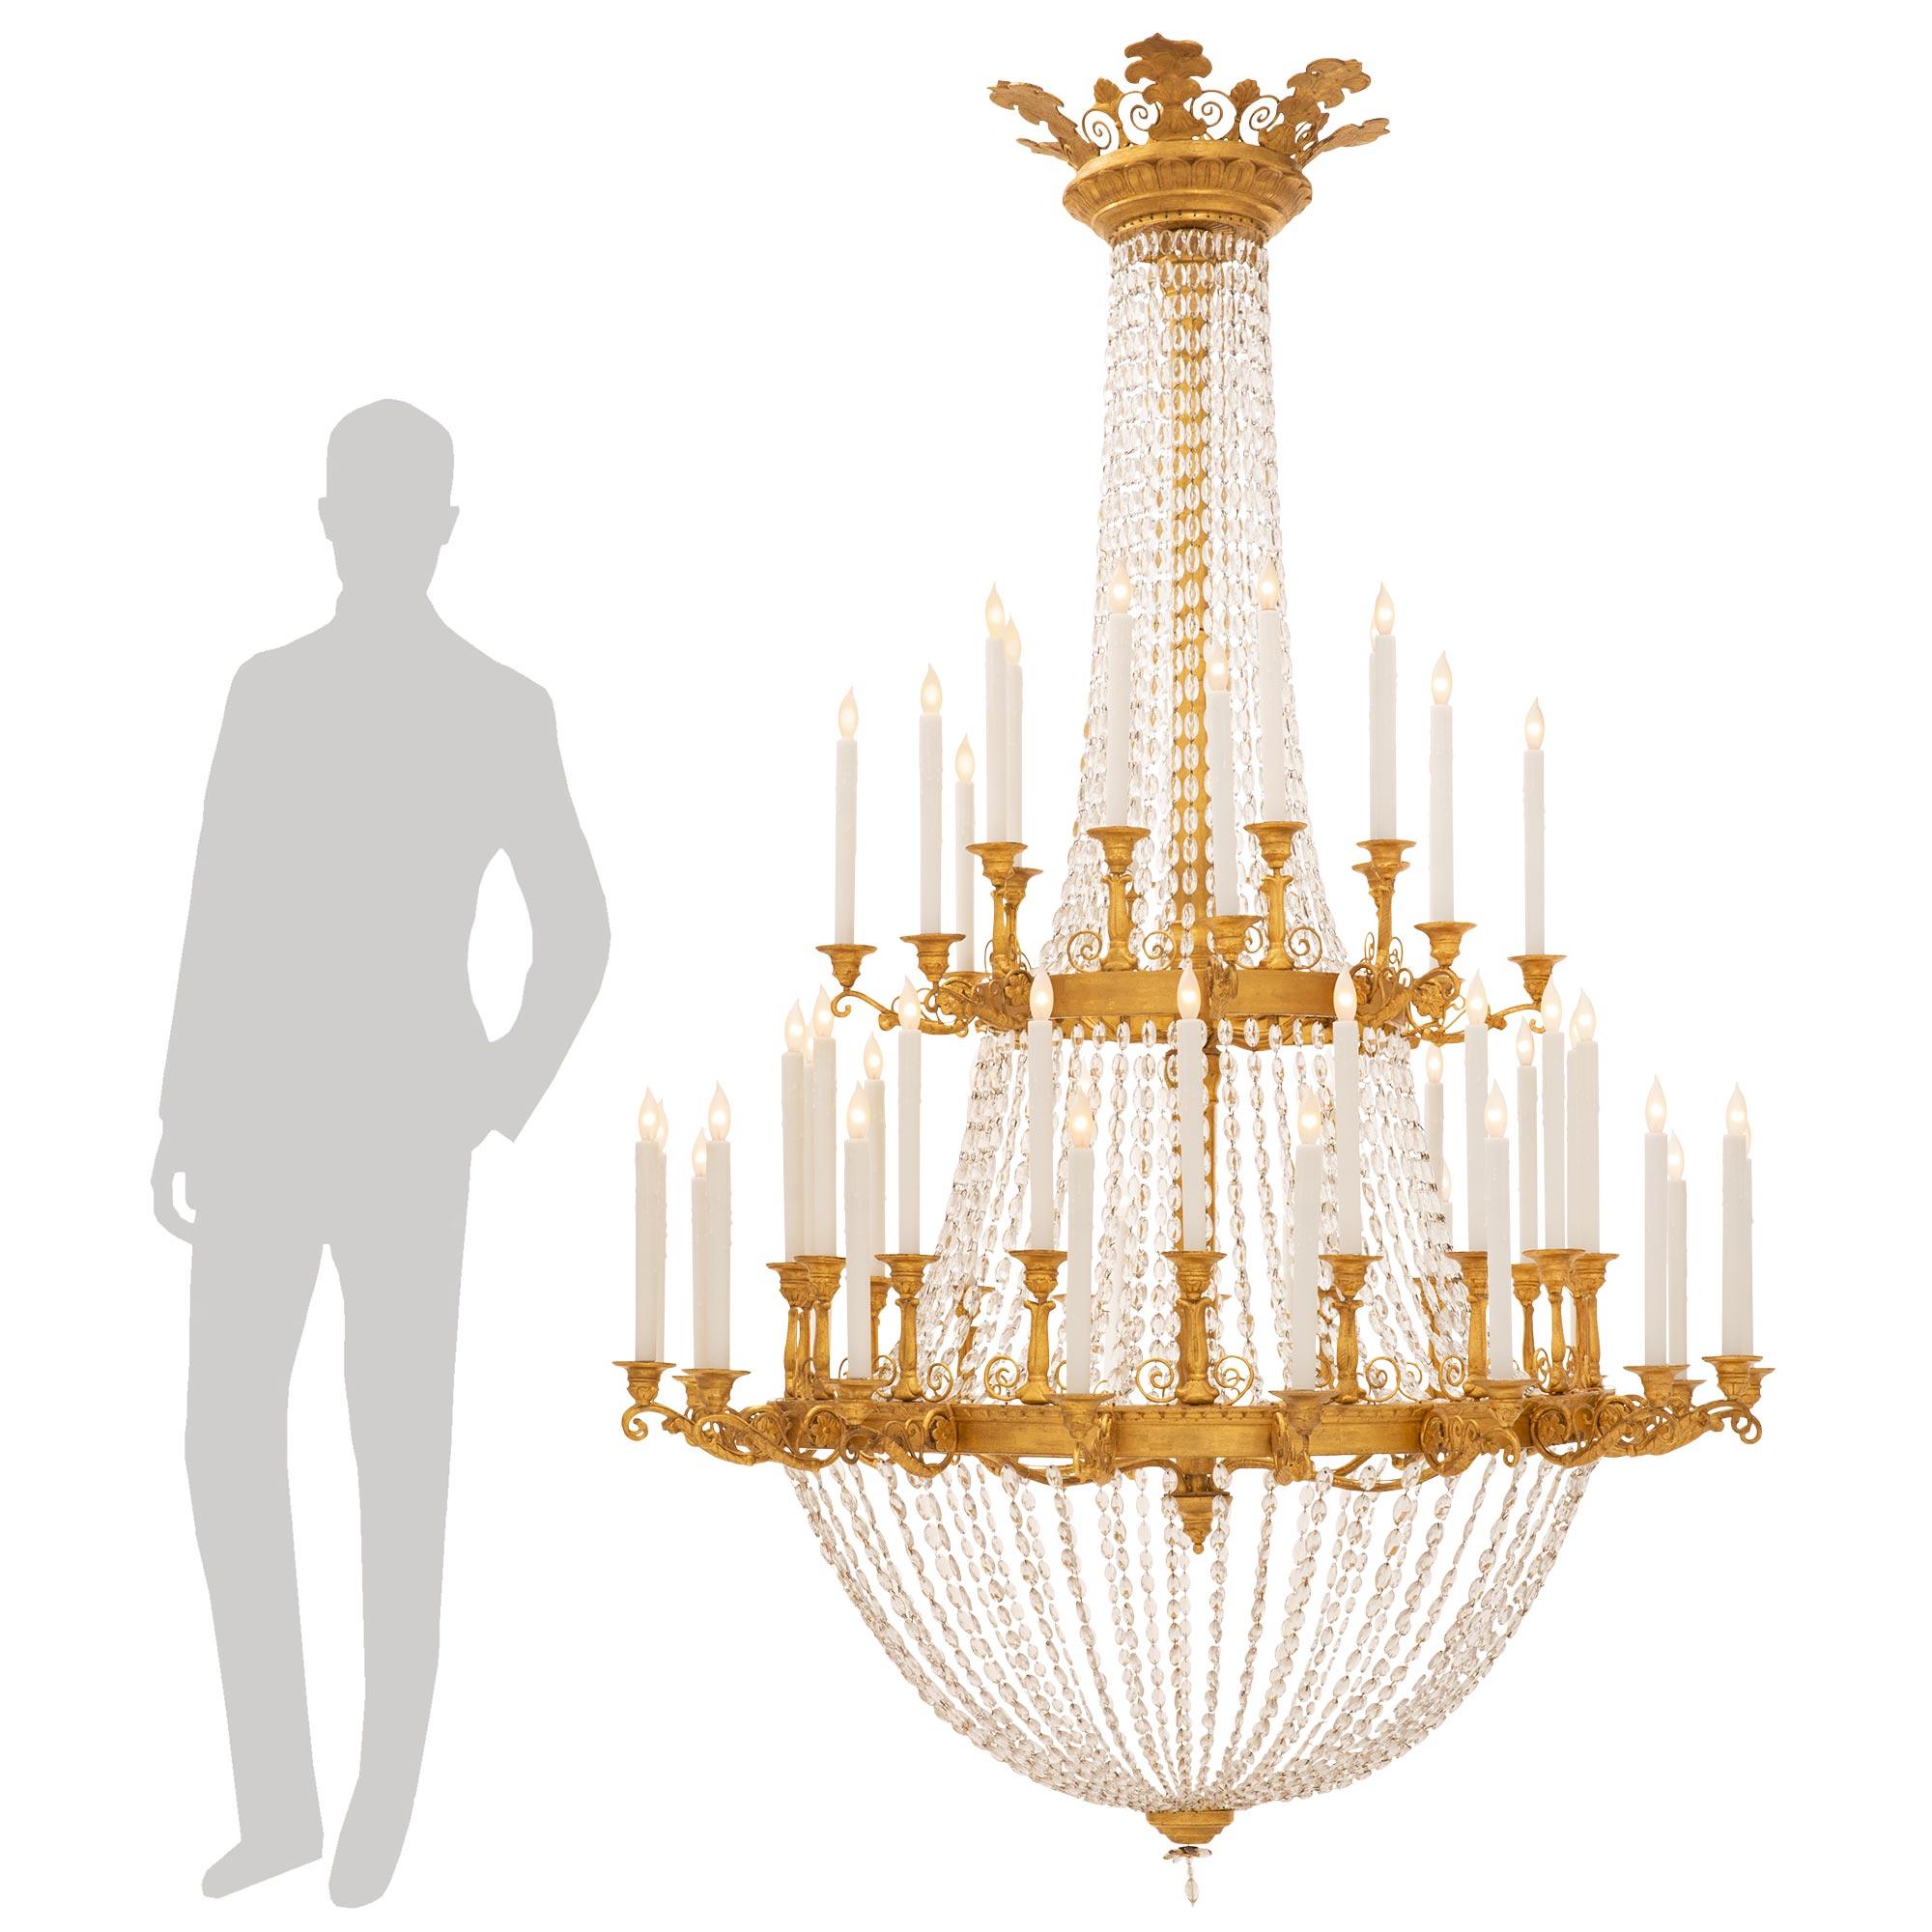 






A stunning large scale Italian 18th century Neo-Classical st. giltwood and crystal chandelier. The fifty two arm two tiered chandelier is centered by a charming bottom crystal floral finial and circular mottled giltwood reserve from where an